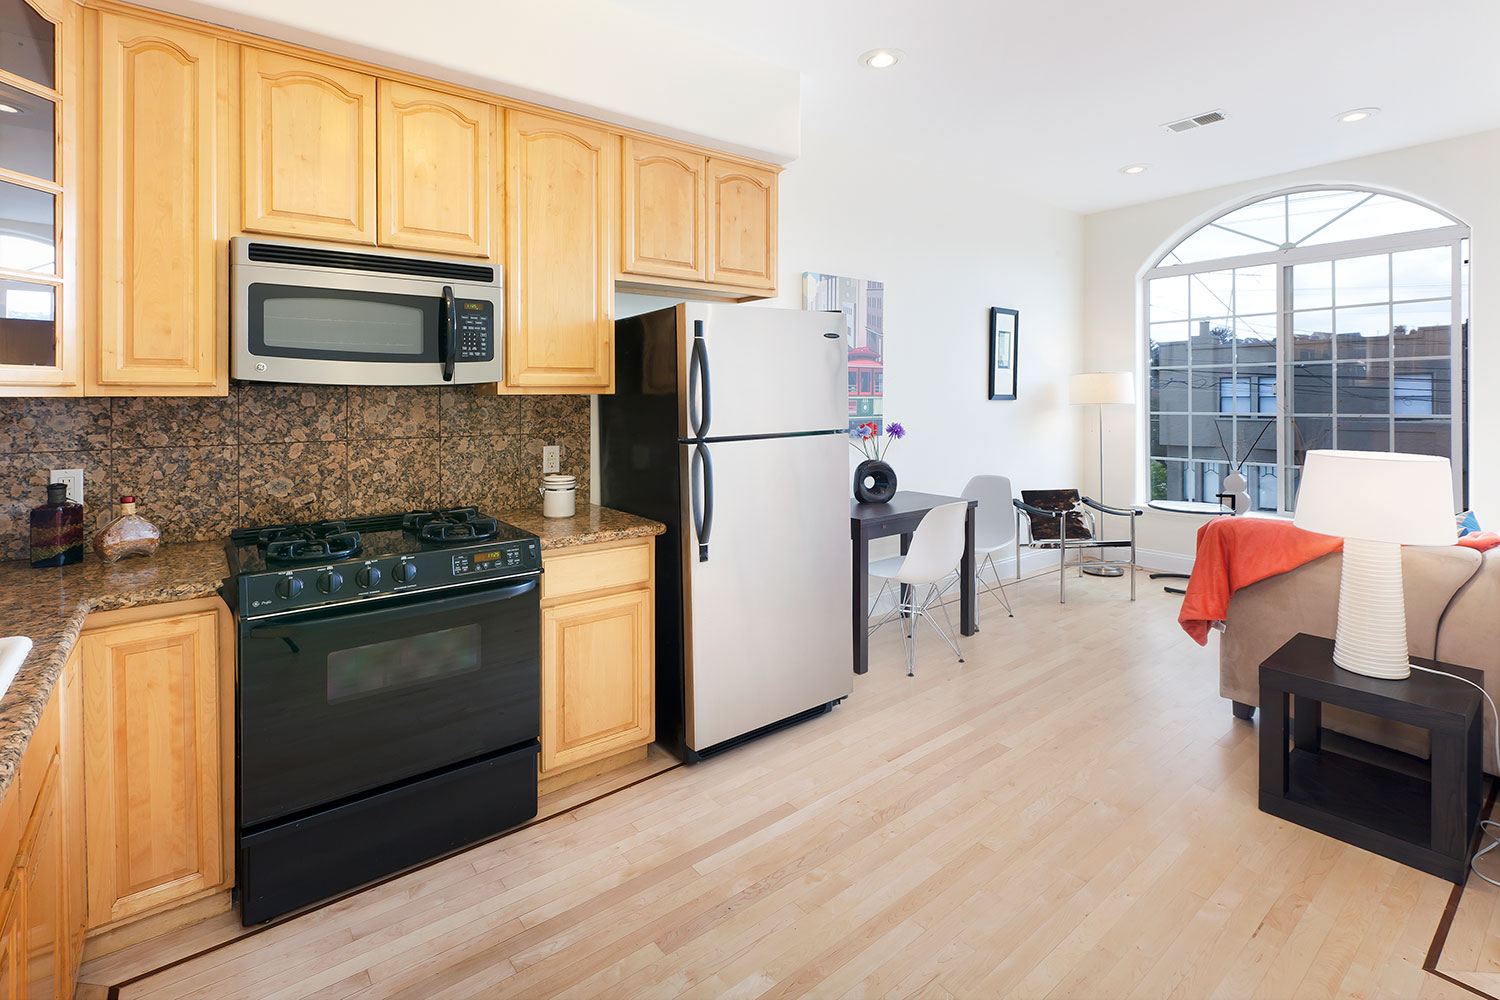 Interior kitchen and dining room. Two bedroom condominium in the Mission District of San Francisco.